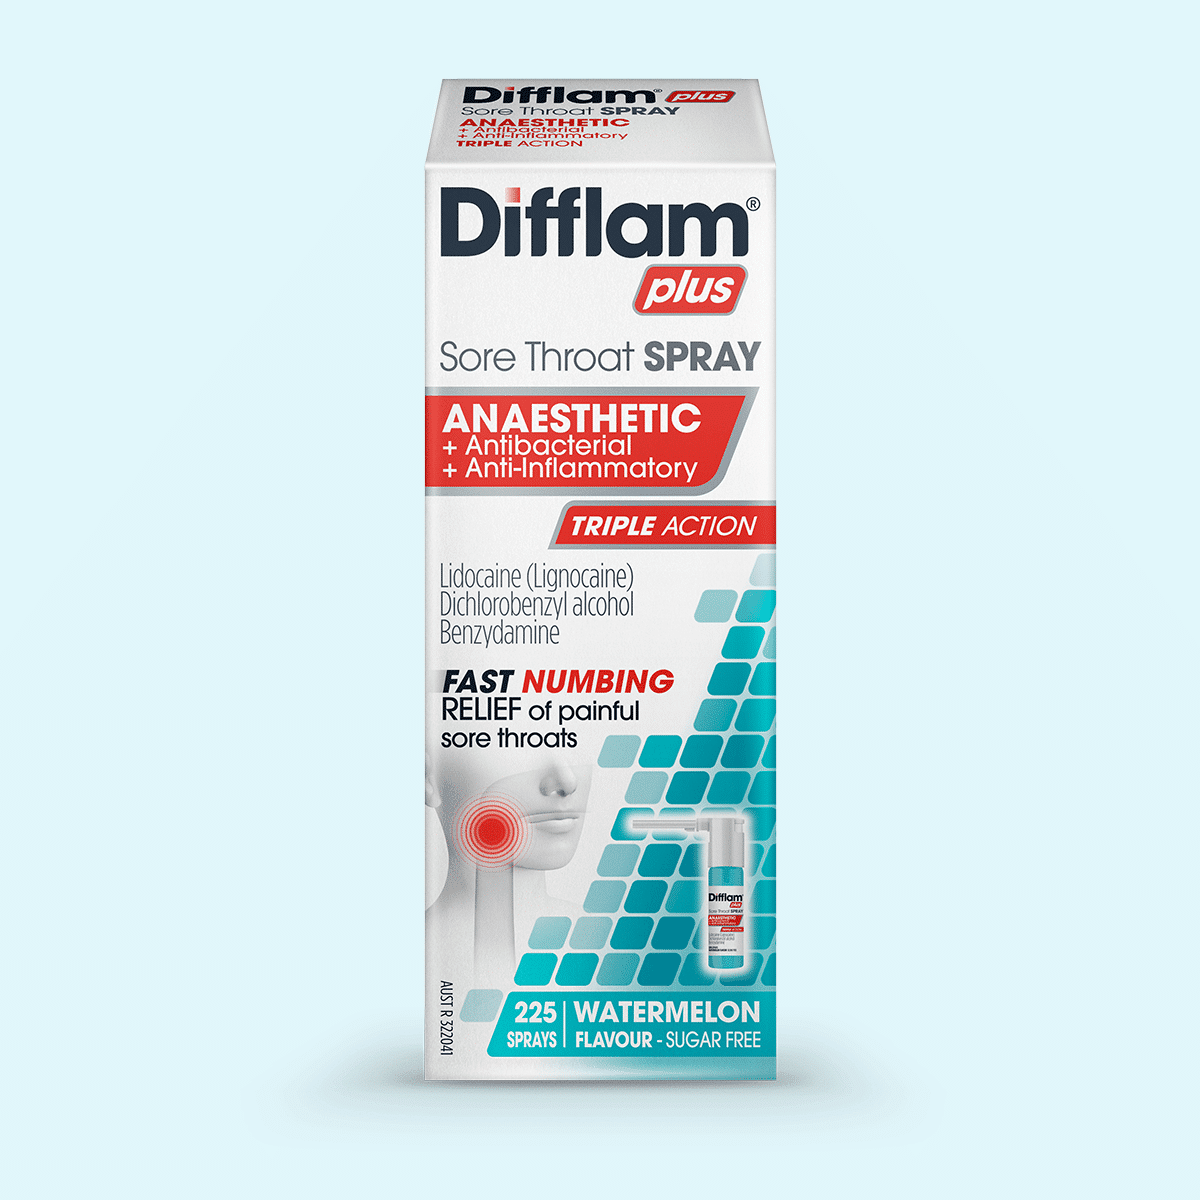 Difflam Throat Sprays are antibacterial and provide fast soothing relief by reducing inflammation. For an extra sore throat, try Difflam Plus Anaesthetic sore throat spray.